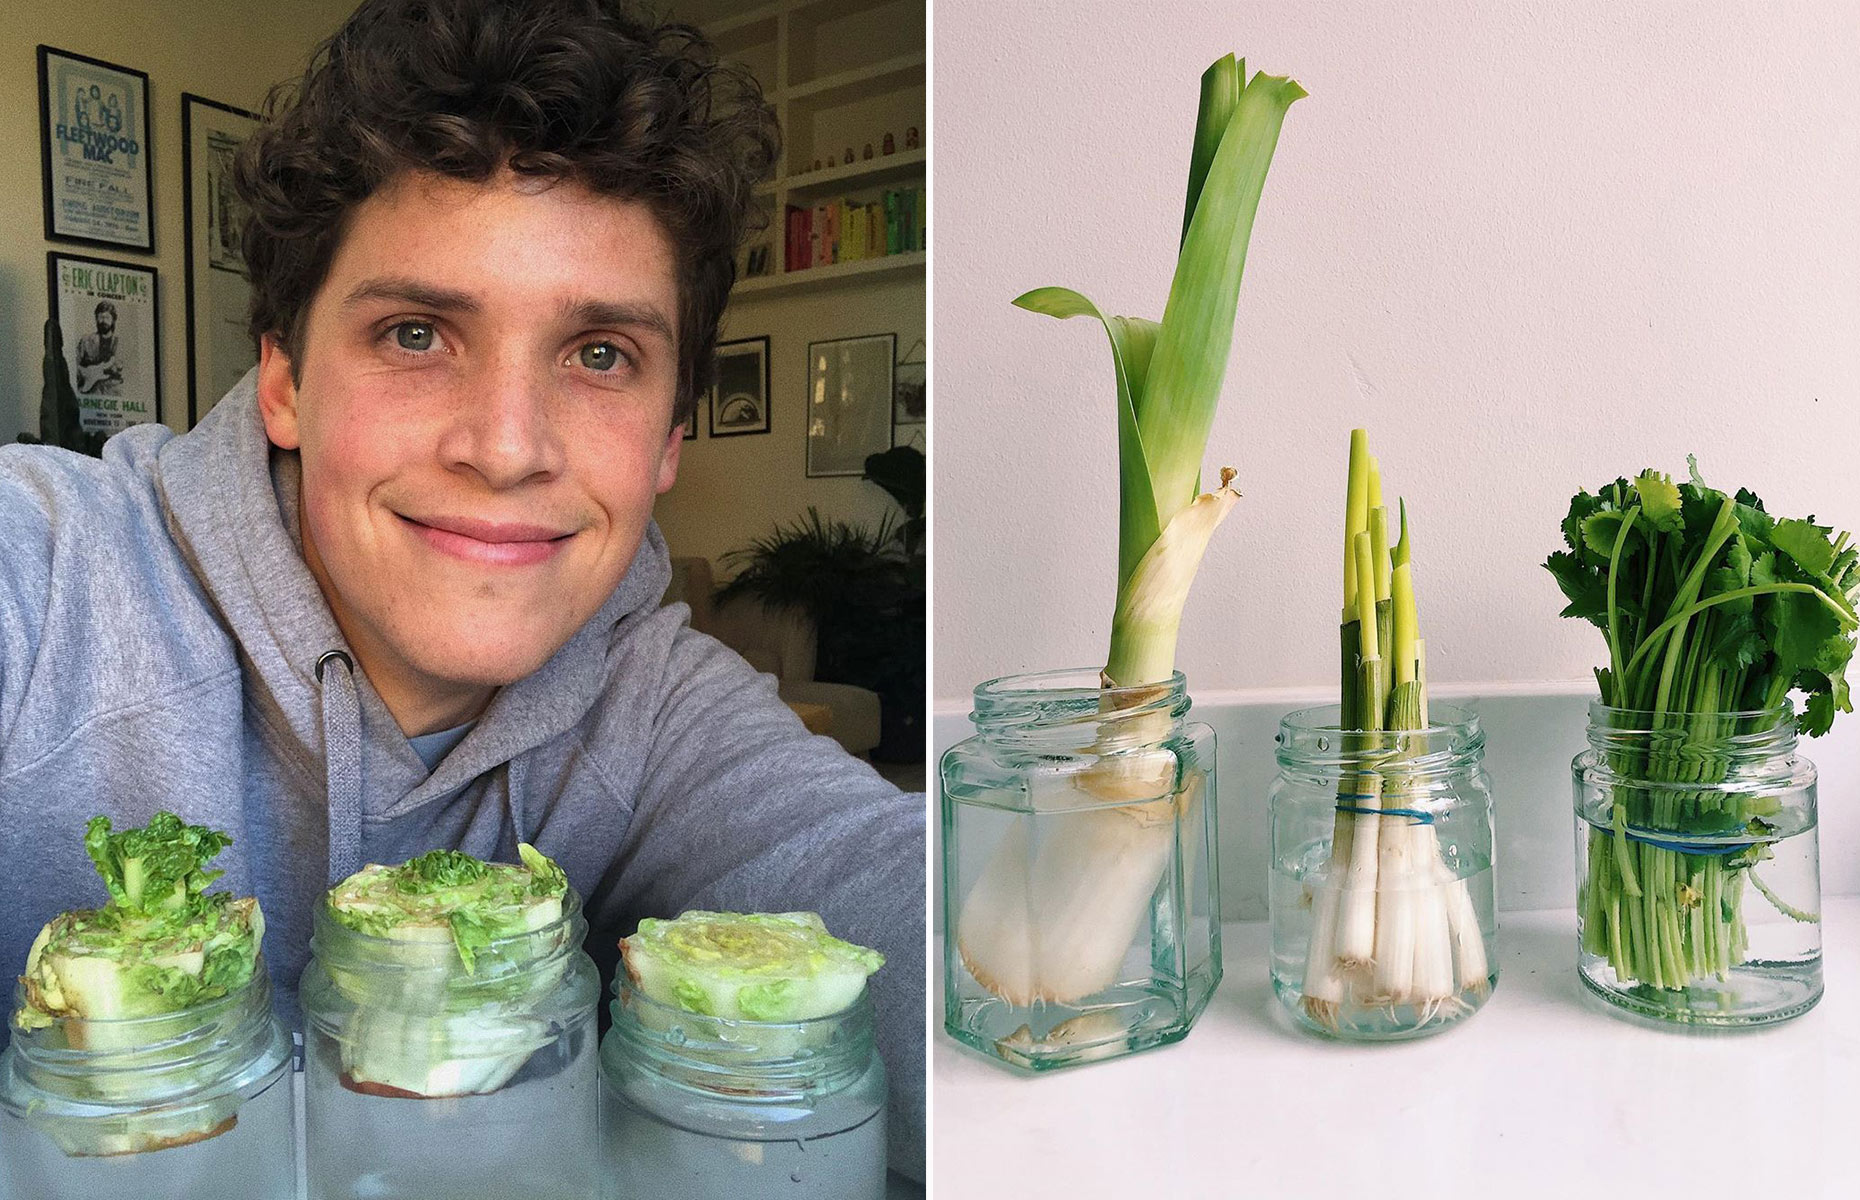 A regrowing aficionado, Max has cultivated everything from lemongrass to leeks. Image: @maxlamanna / Instagram